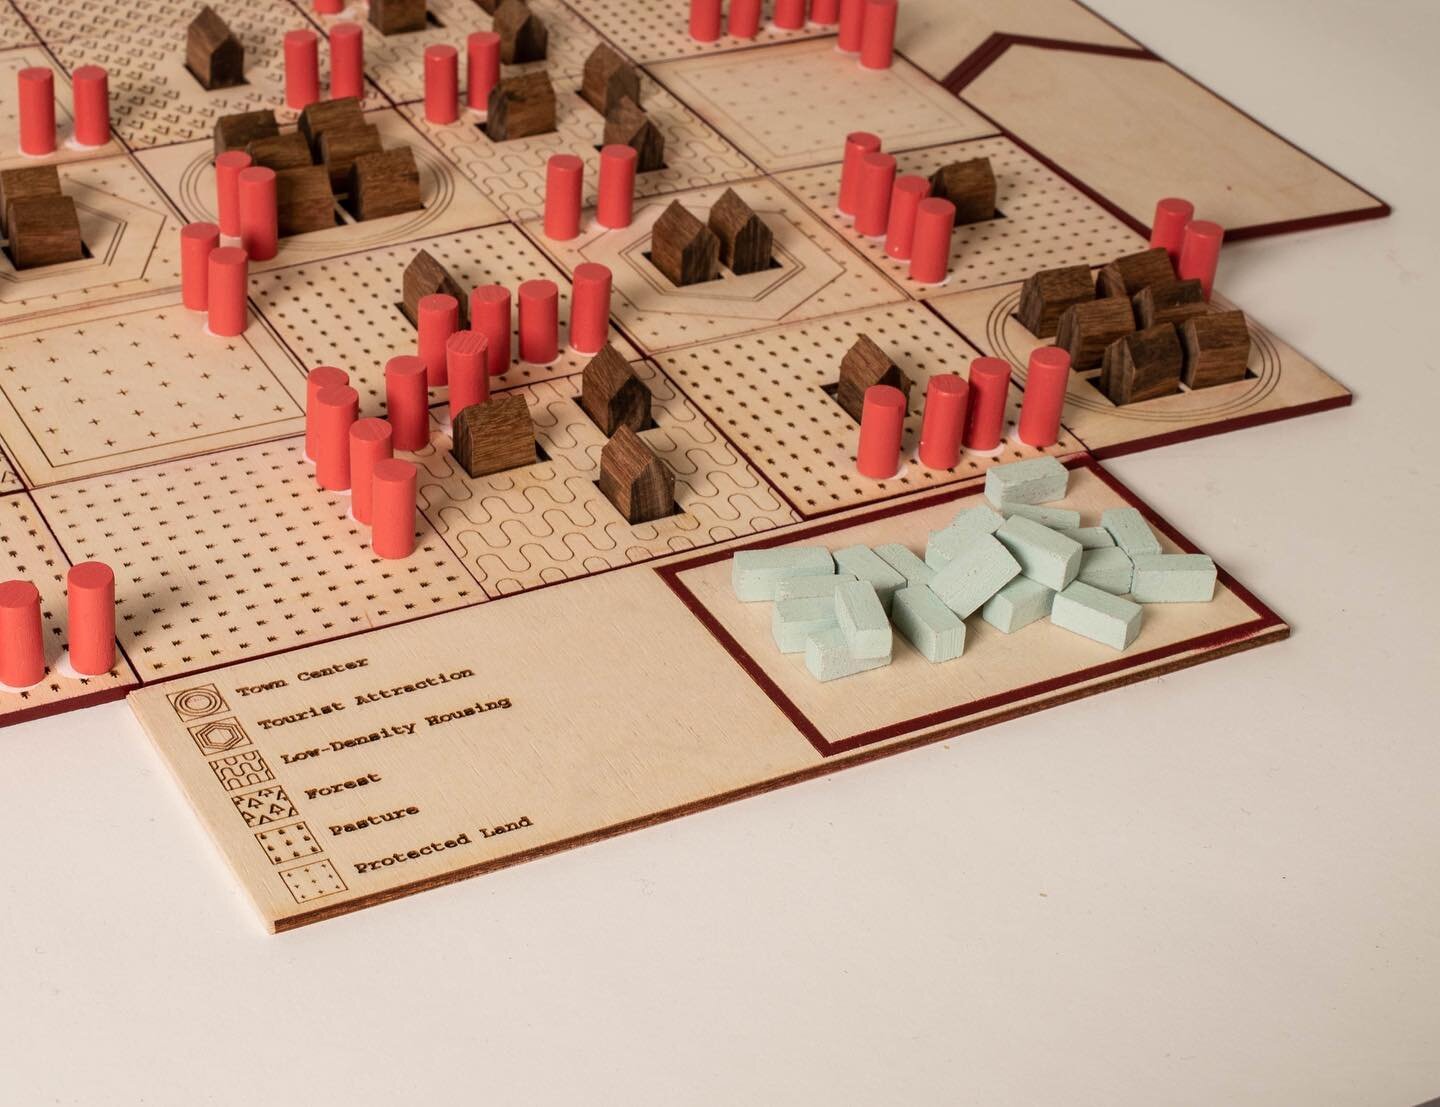 &quot;Where There's Smoke: a cooperative not-just-another-disaster game&quot;

Games are shown to be more effective in teaching disaster response, transforming the problem into an approachable, thought-provoking, and fun scenario without trivializing